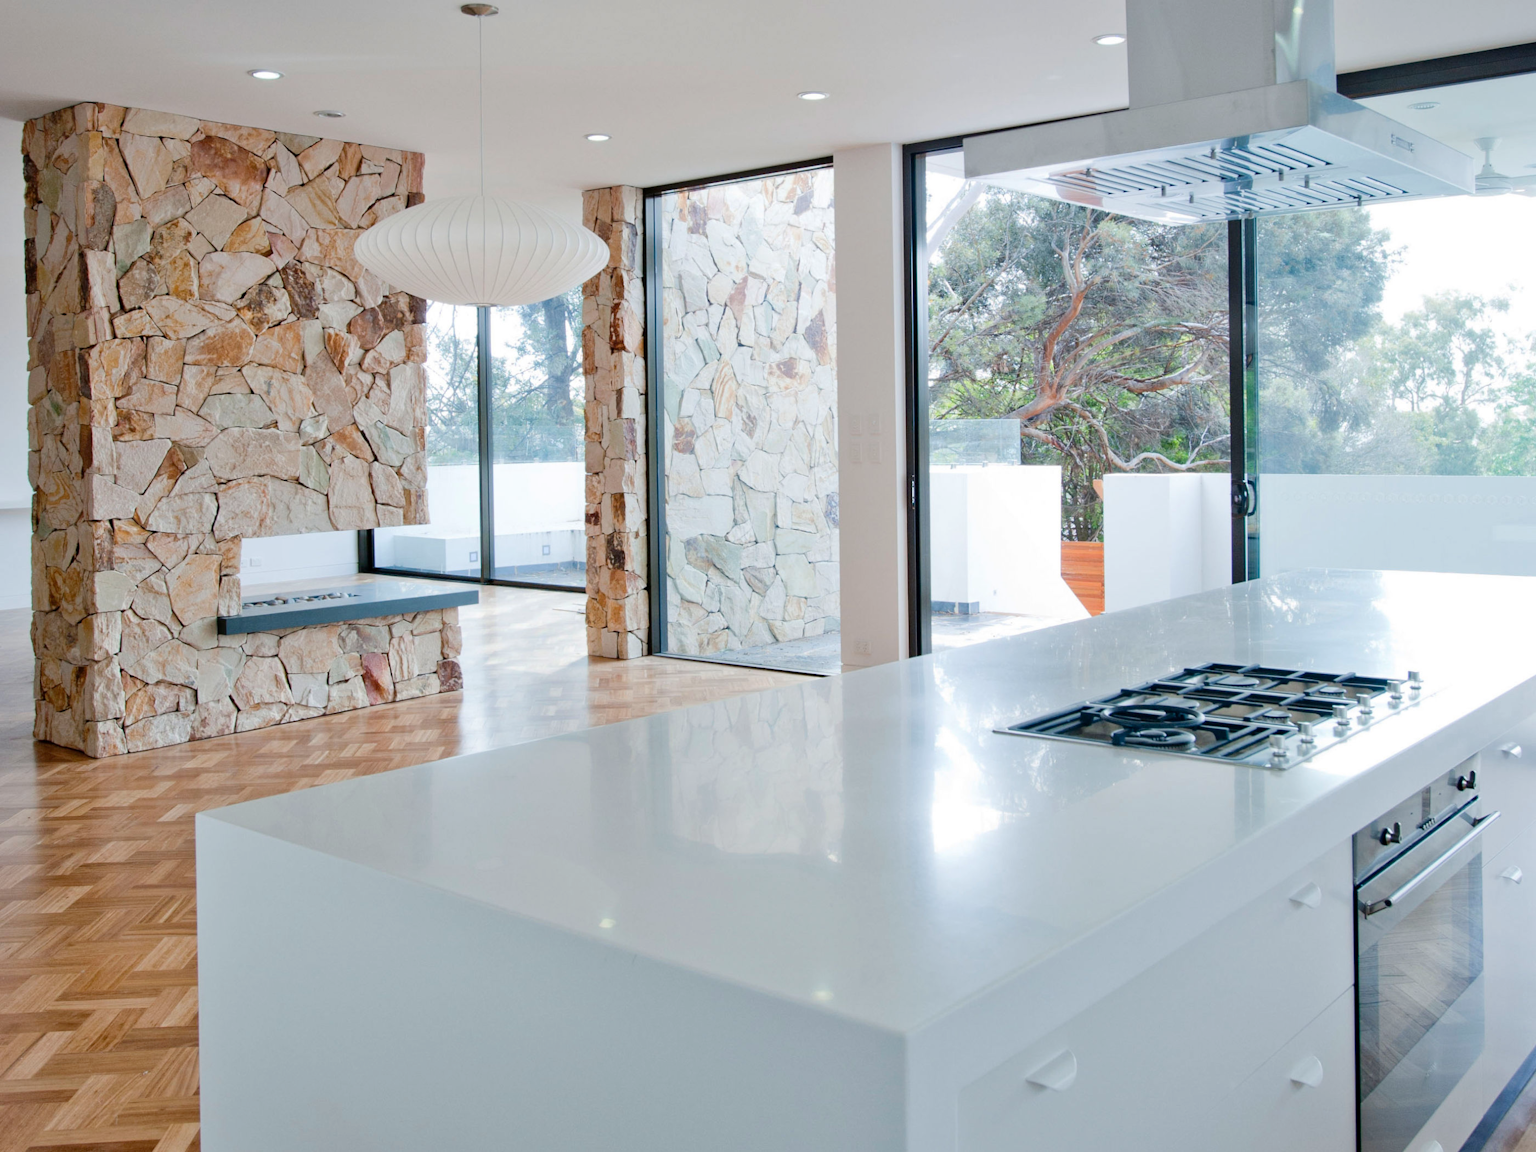 Kitchen and living space with internal fireplace and blade wall in Crackenback sandstone free form cladding